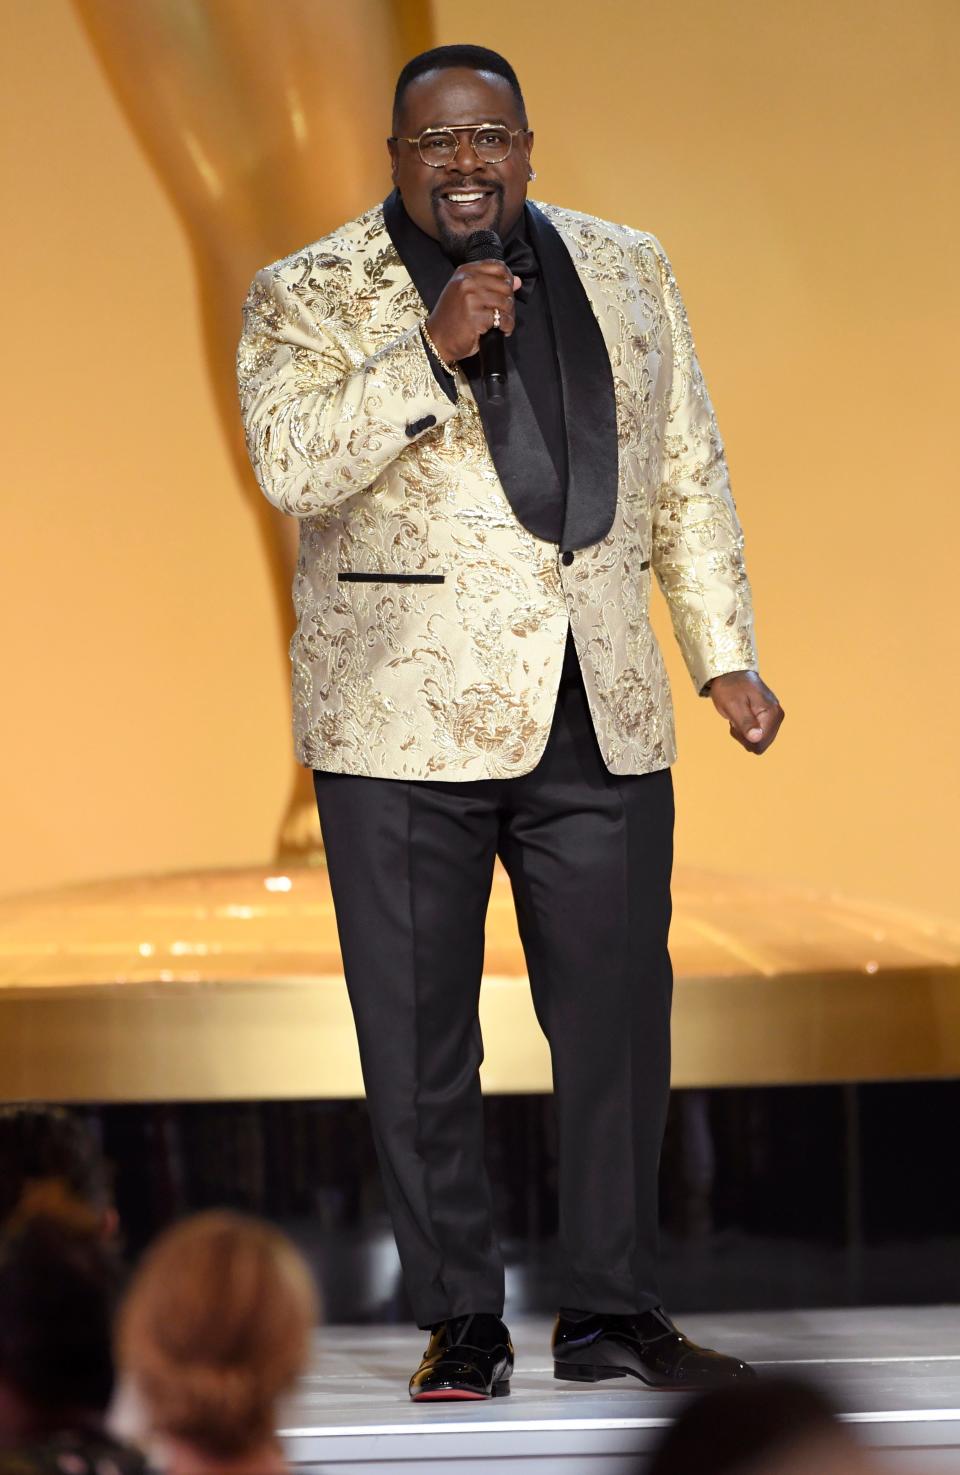 Cedric The Entertainer speaks on stage at the 73rd Emmy Awards on Sunday, Sept. 19, 2021 at the Event Deck at L.A. LIVE in Los Angeles.